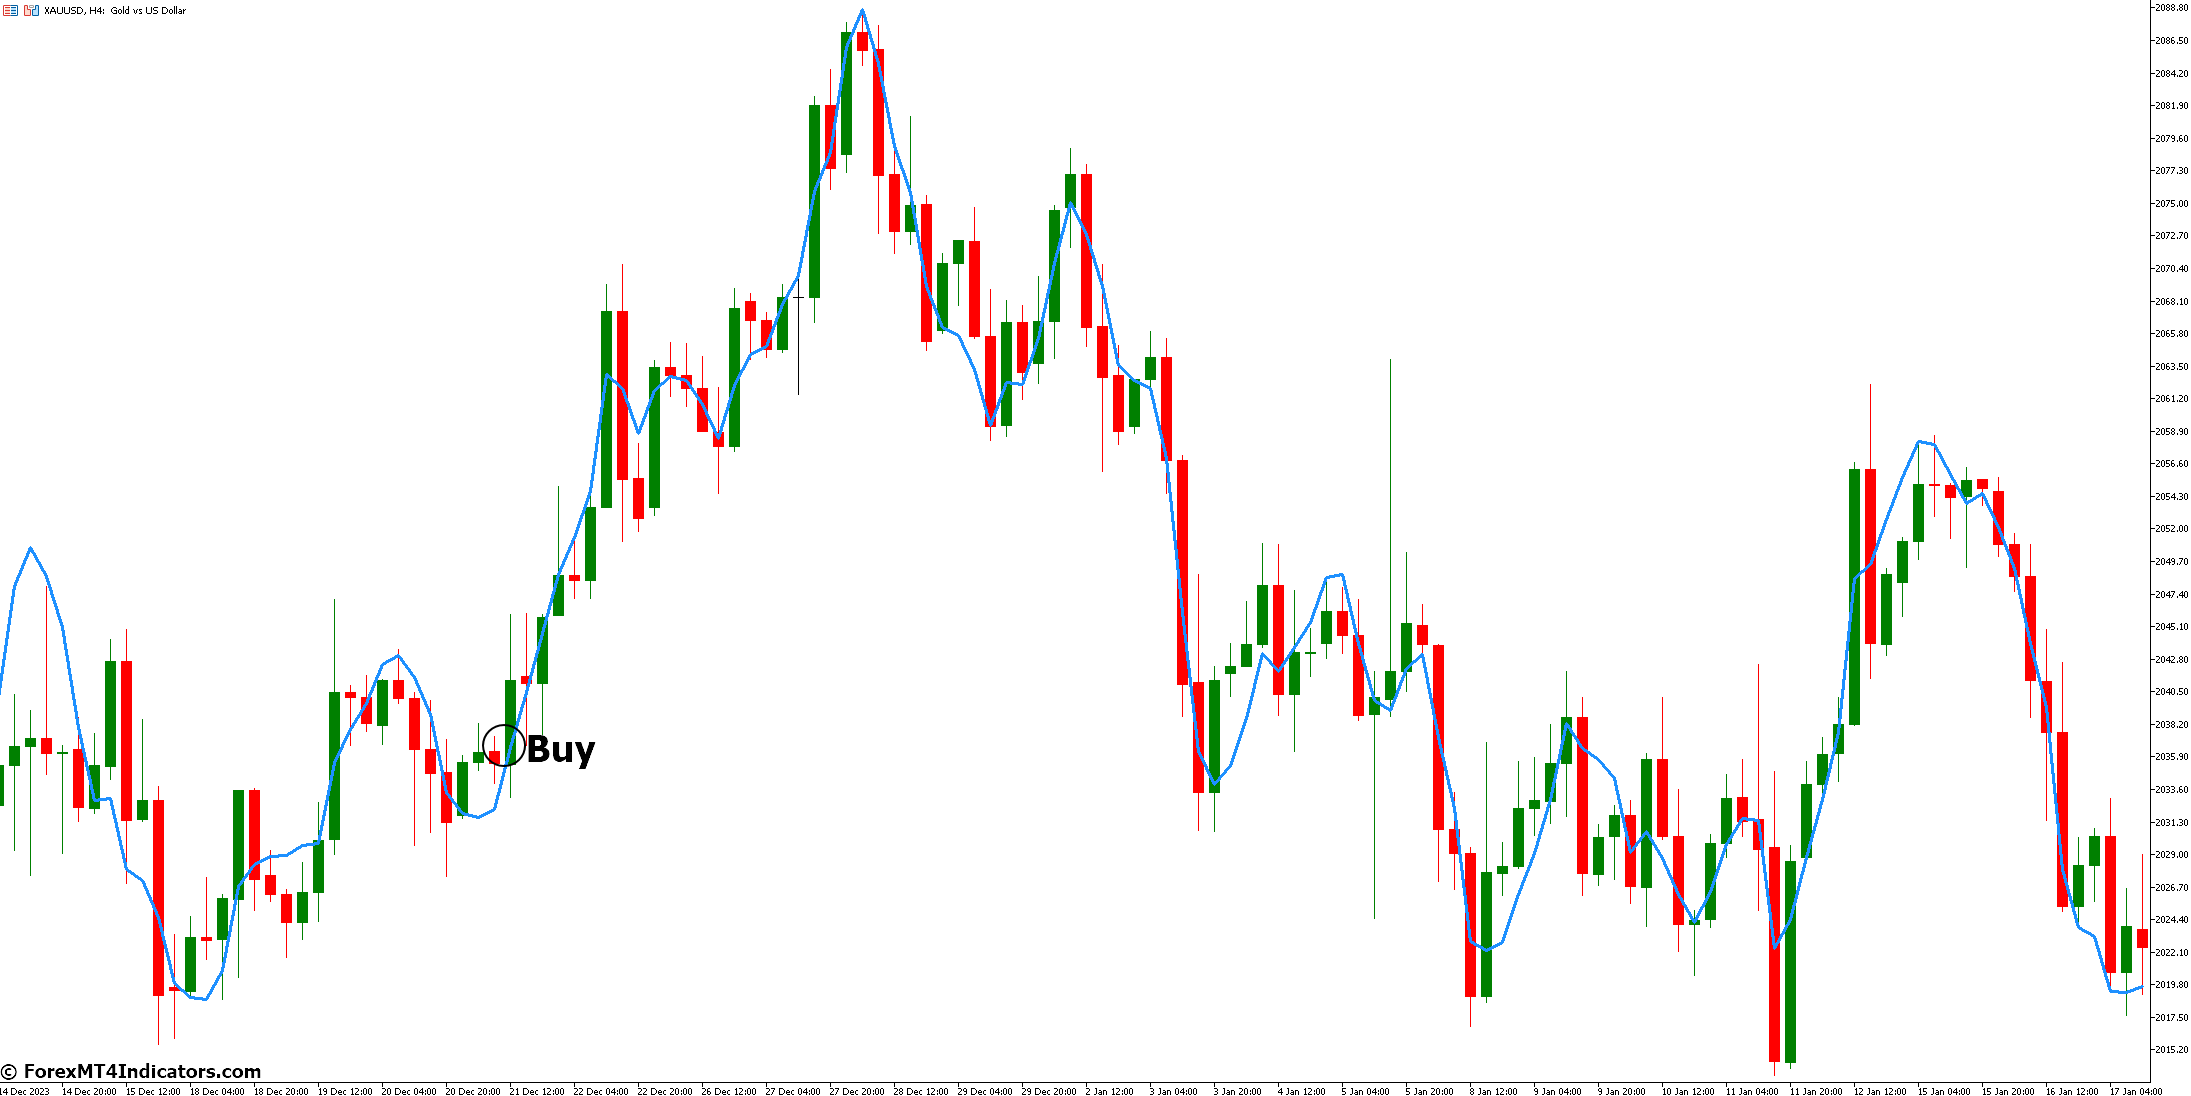 How to Trade with Parma Indicator - Buy Entry